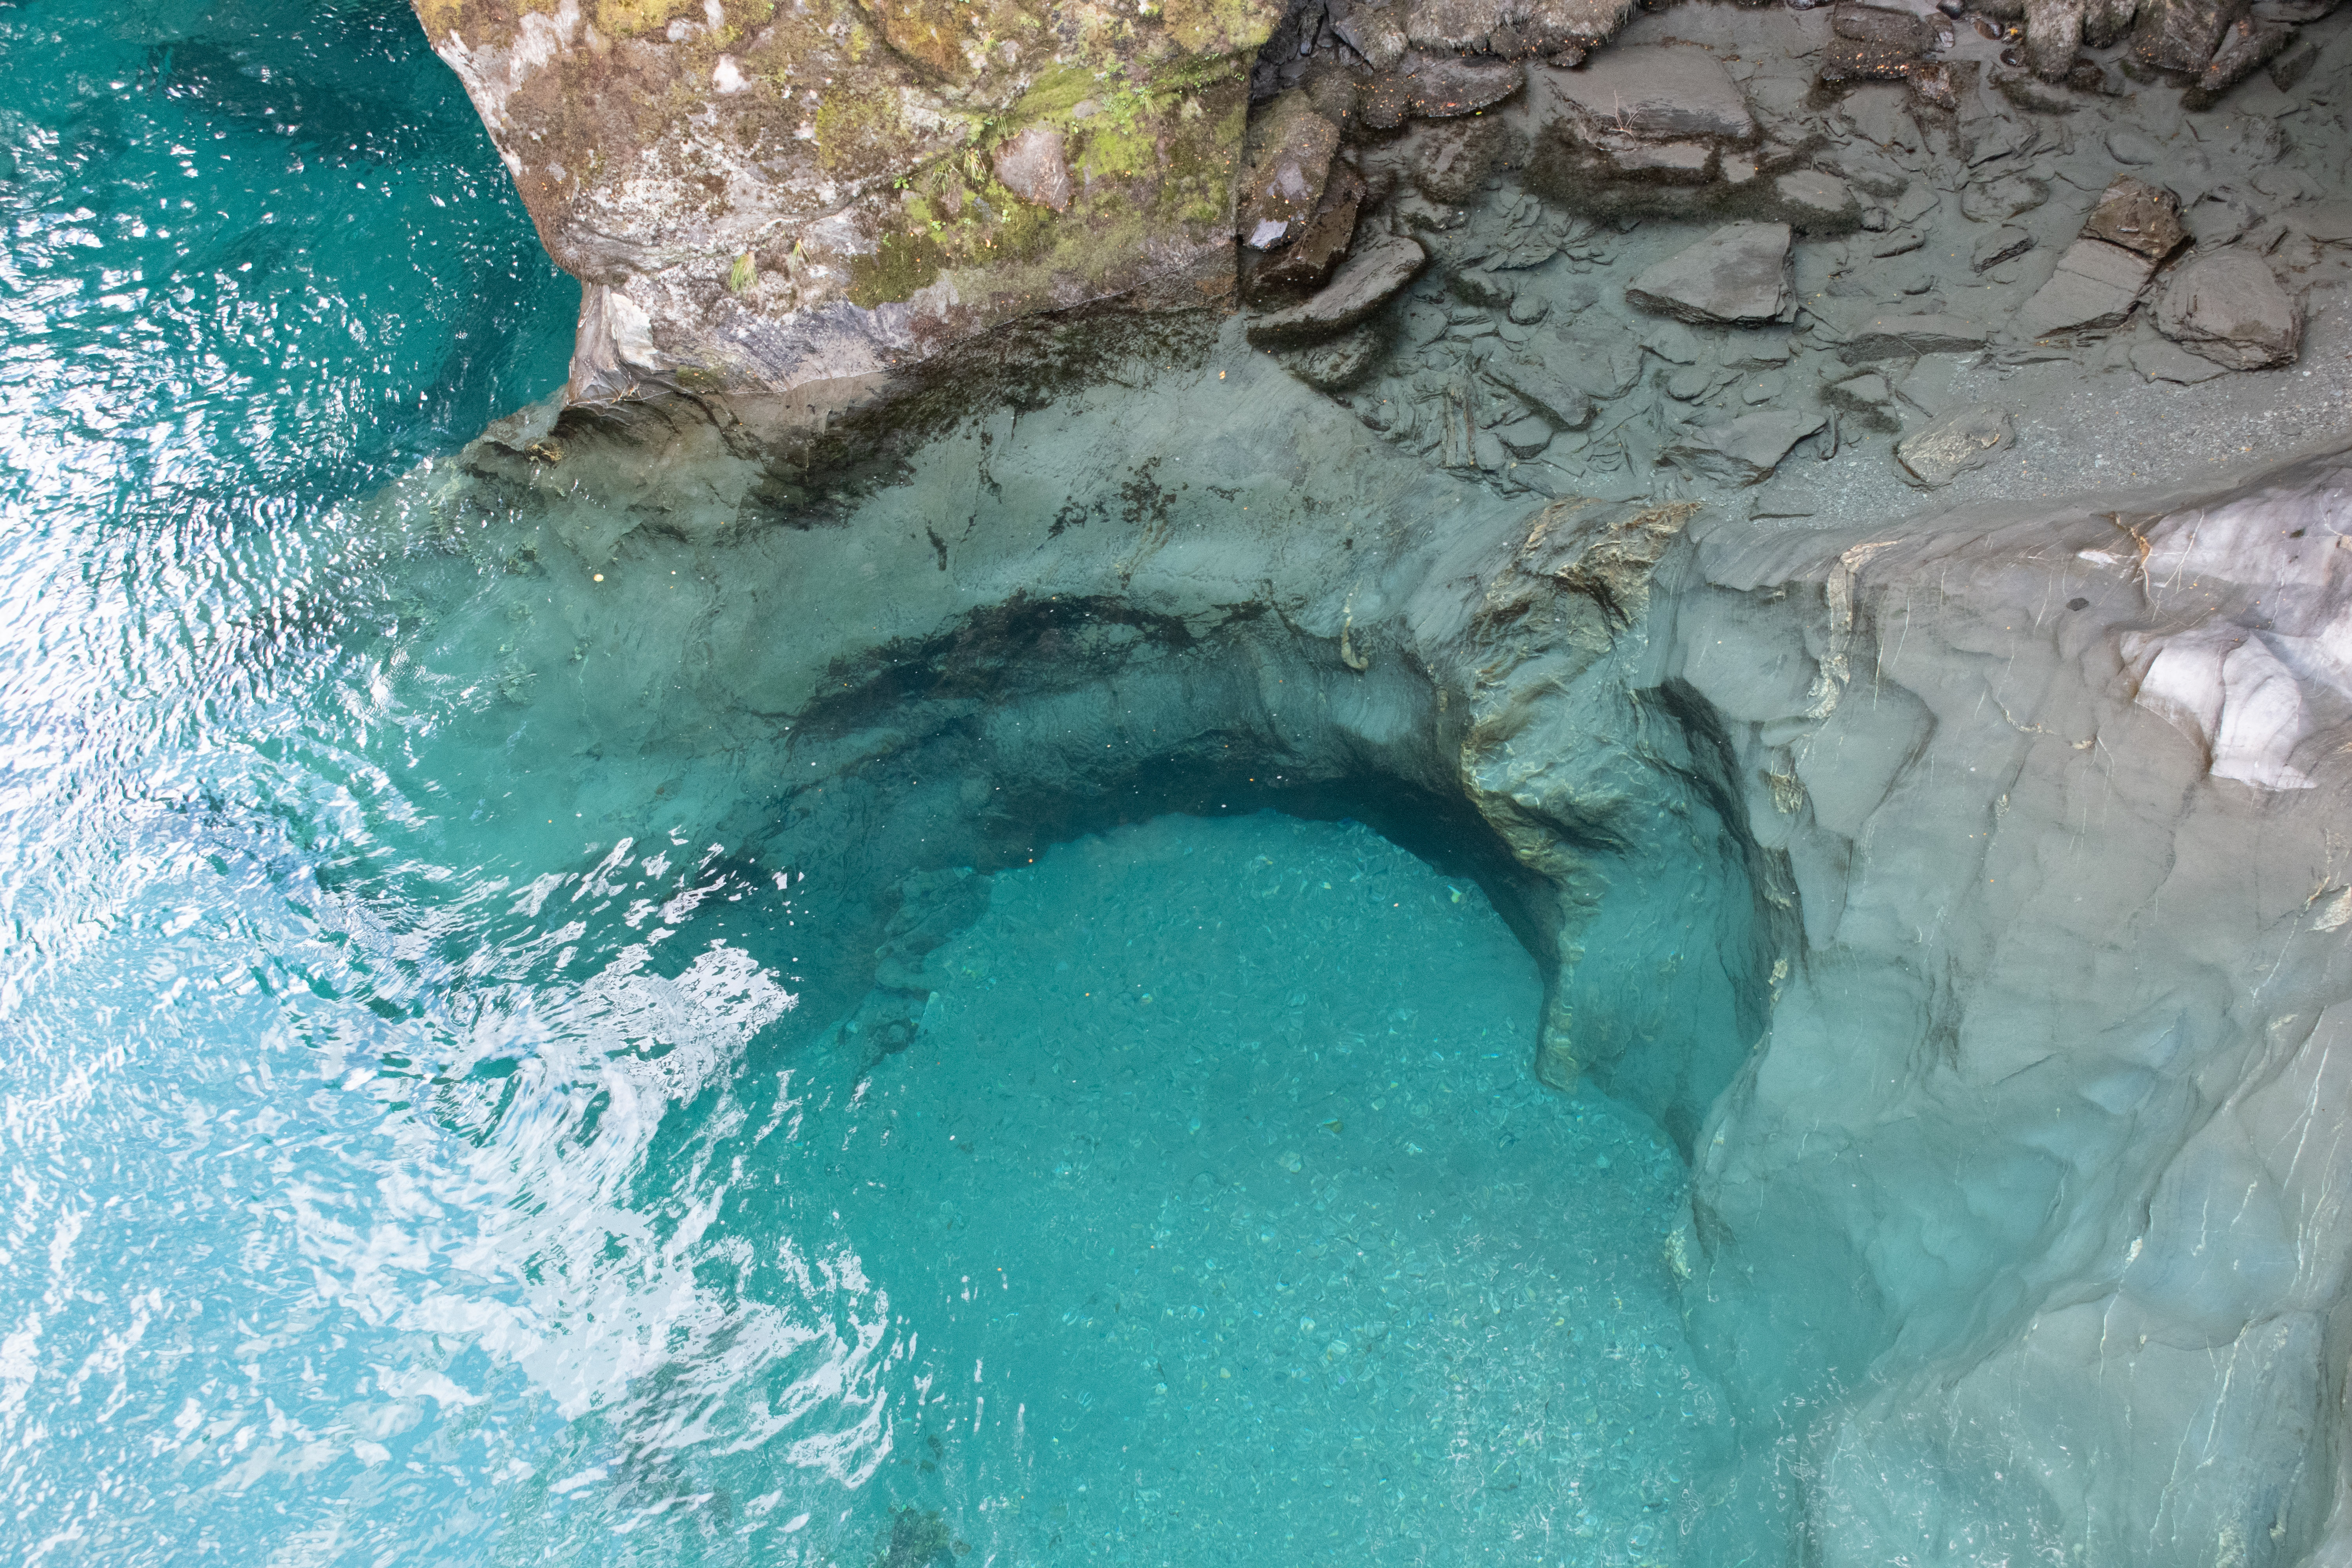 An aerial view of the dramatic blue pools. Round coves can be seen where the water has carved the cliffs on either side of the tributary, the water flowing down from the mountains into the broad river downstream.